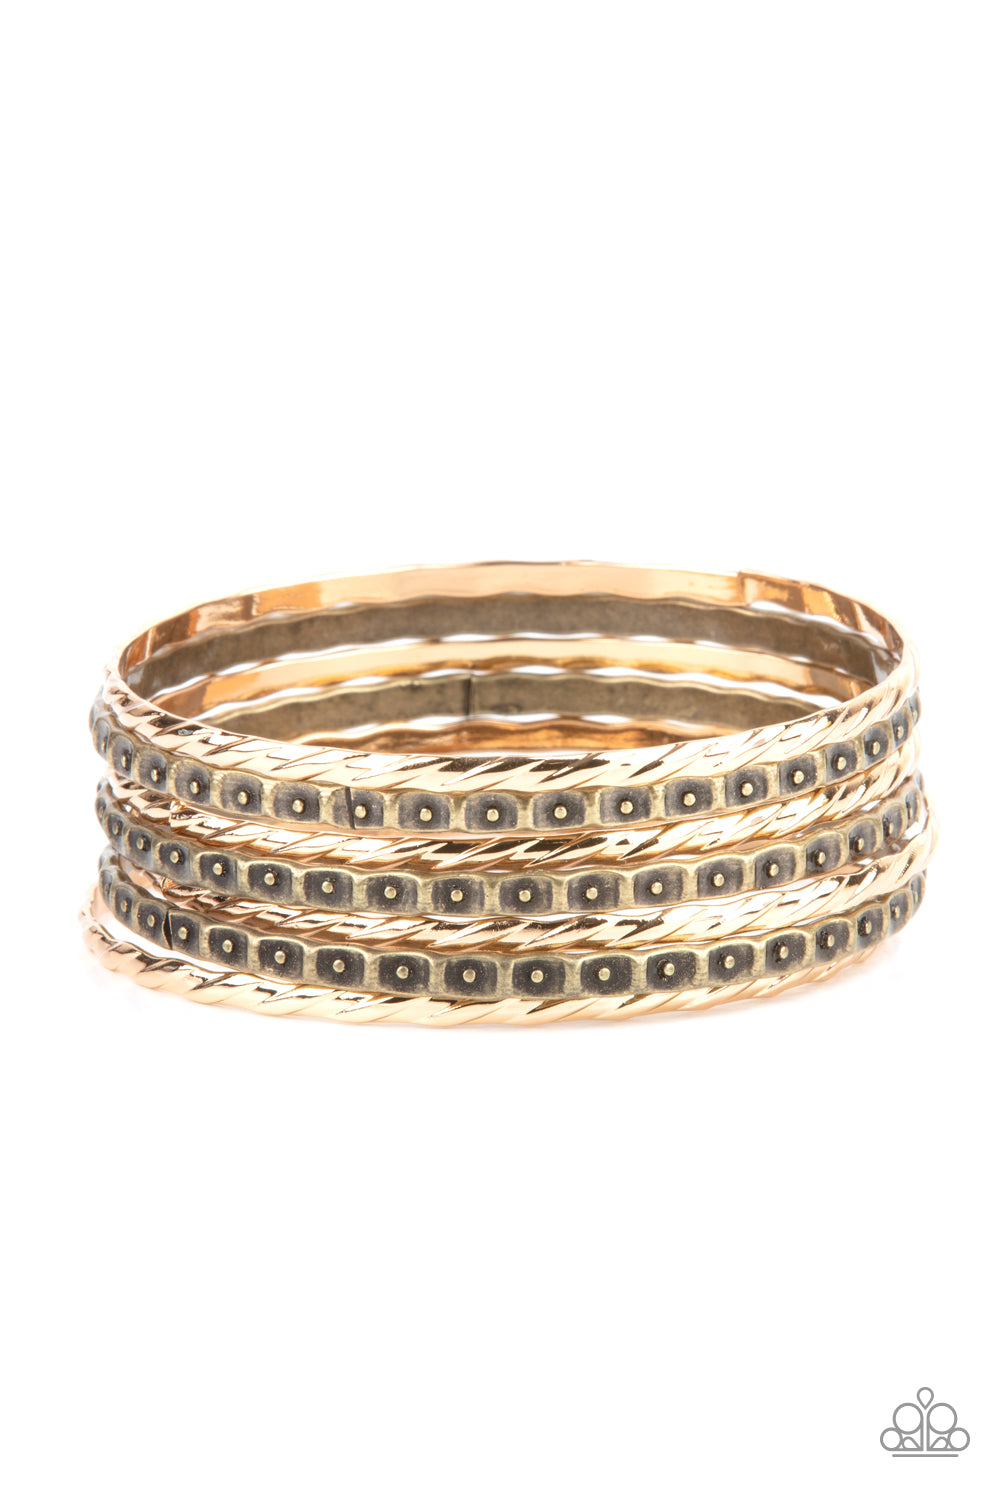 Back-To-Back Stacks Multi Bracelet - Paparazzi Accessories  Embossed in slanted ribbons of textured and studded hammered patterns, trios of mismatched brass and gold bangles stack across the wrist for an intense industrial vibe.  Sold as one set of six bracelets.